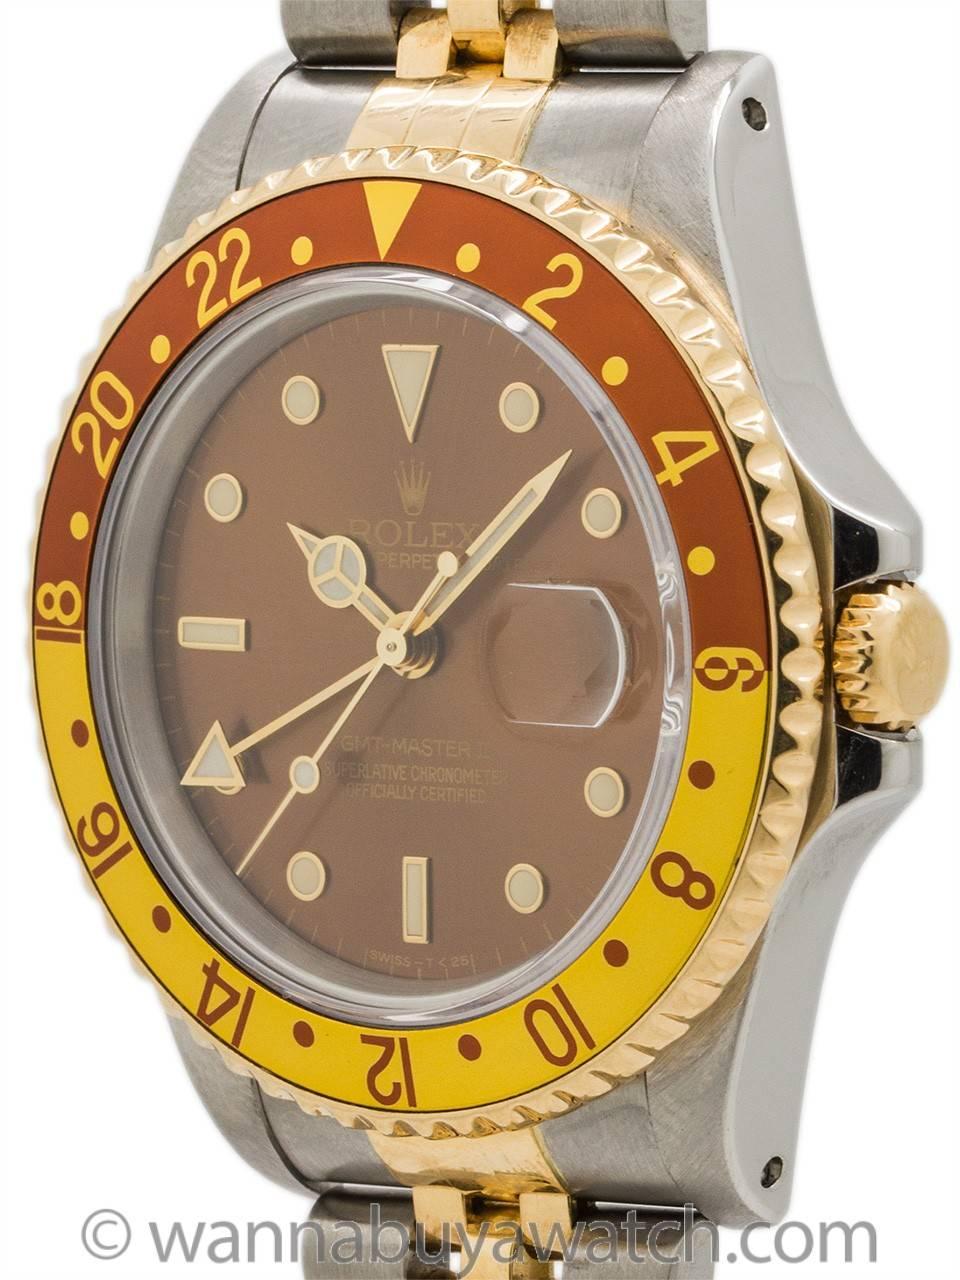 An exceptional condition Rolex GMT SS/18K YG ref 16713 serial # N3 circa 1991. Featuring 40mm diameter stainless steel case with 18K YG bi-directional 24 hour GMT bezel, acrylic crystal, and very pleasing “root beer” dial with gold surround luminous